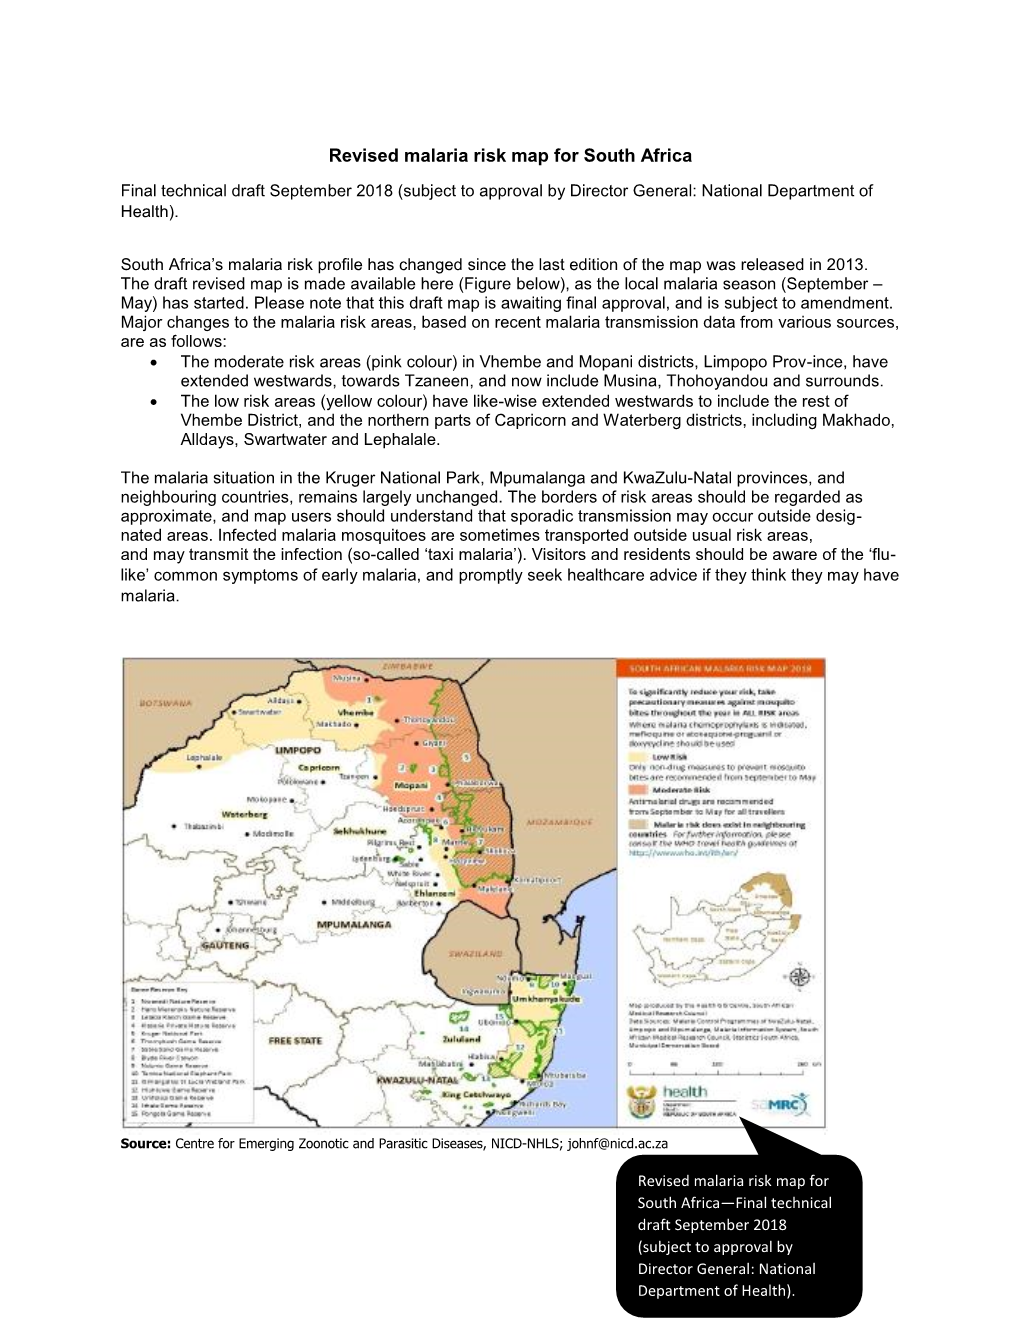 Revised Malaria Risk Map for South Africa